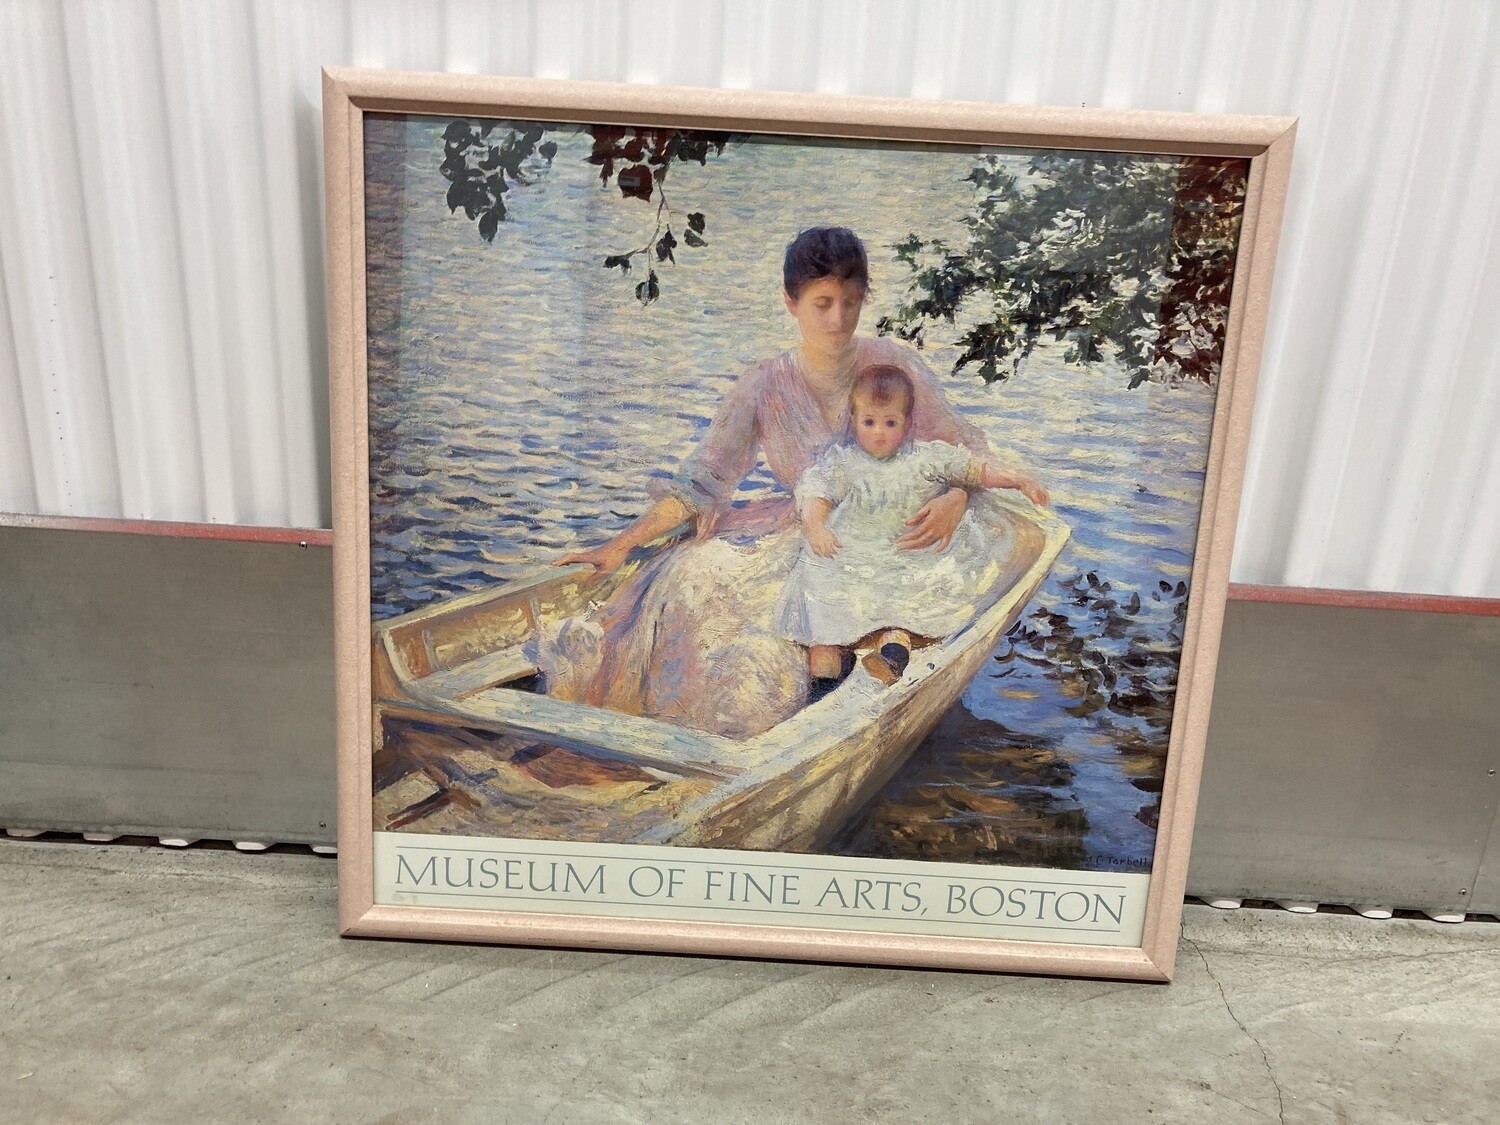 Framed Print: "Mother & Child in a Boat" Tarbell #2314 ** 3 mos. to sell, clearance + 30% off sale